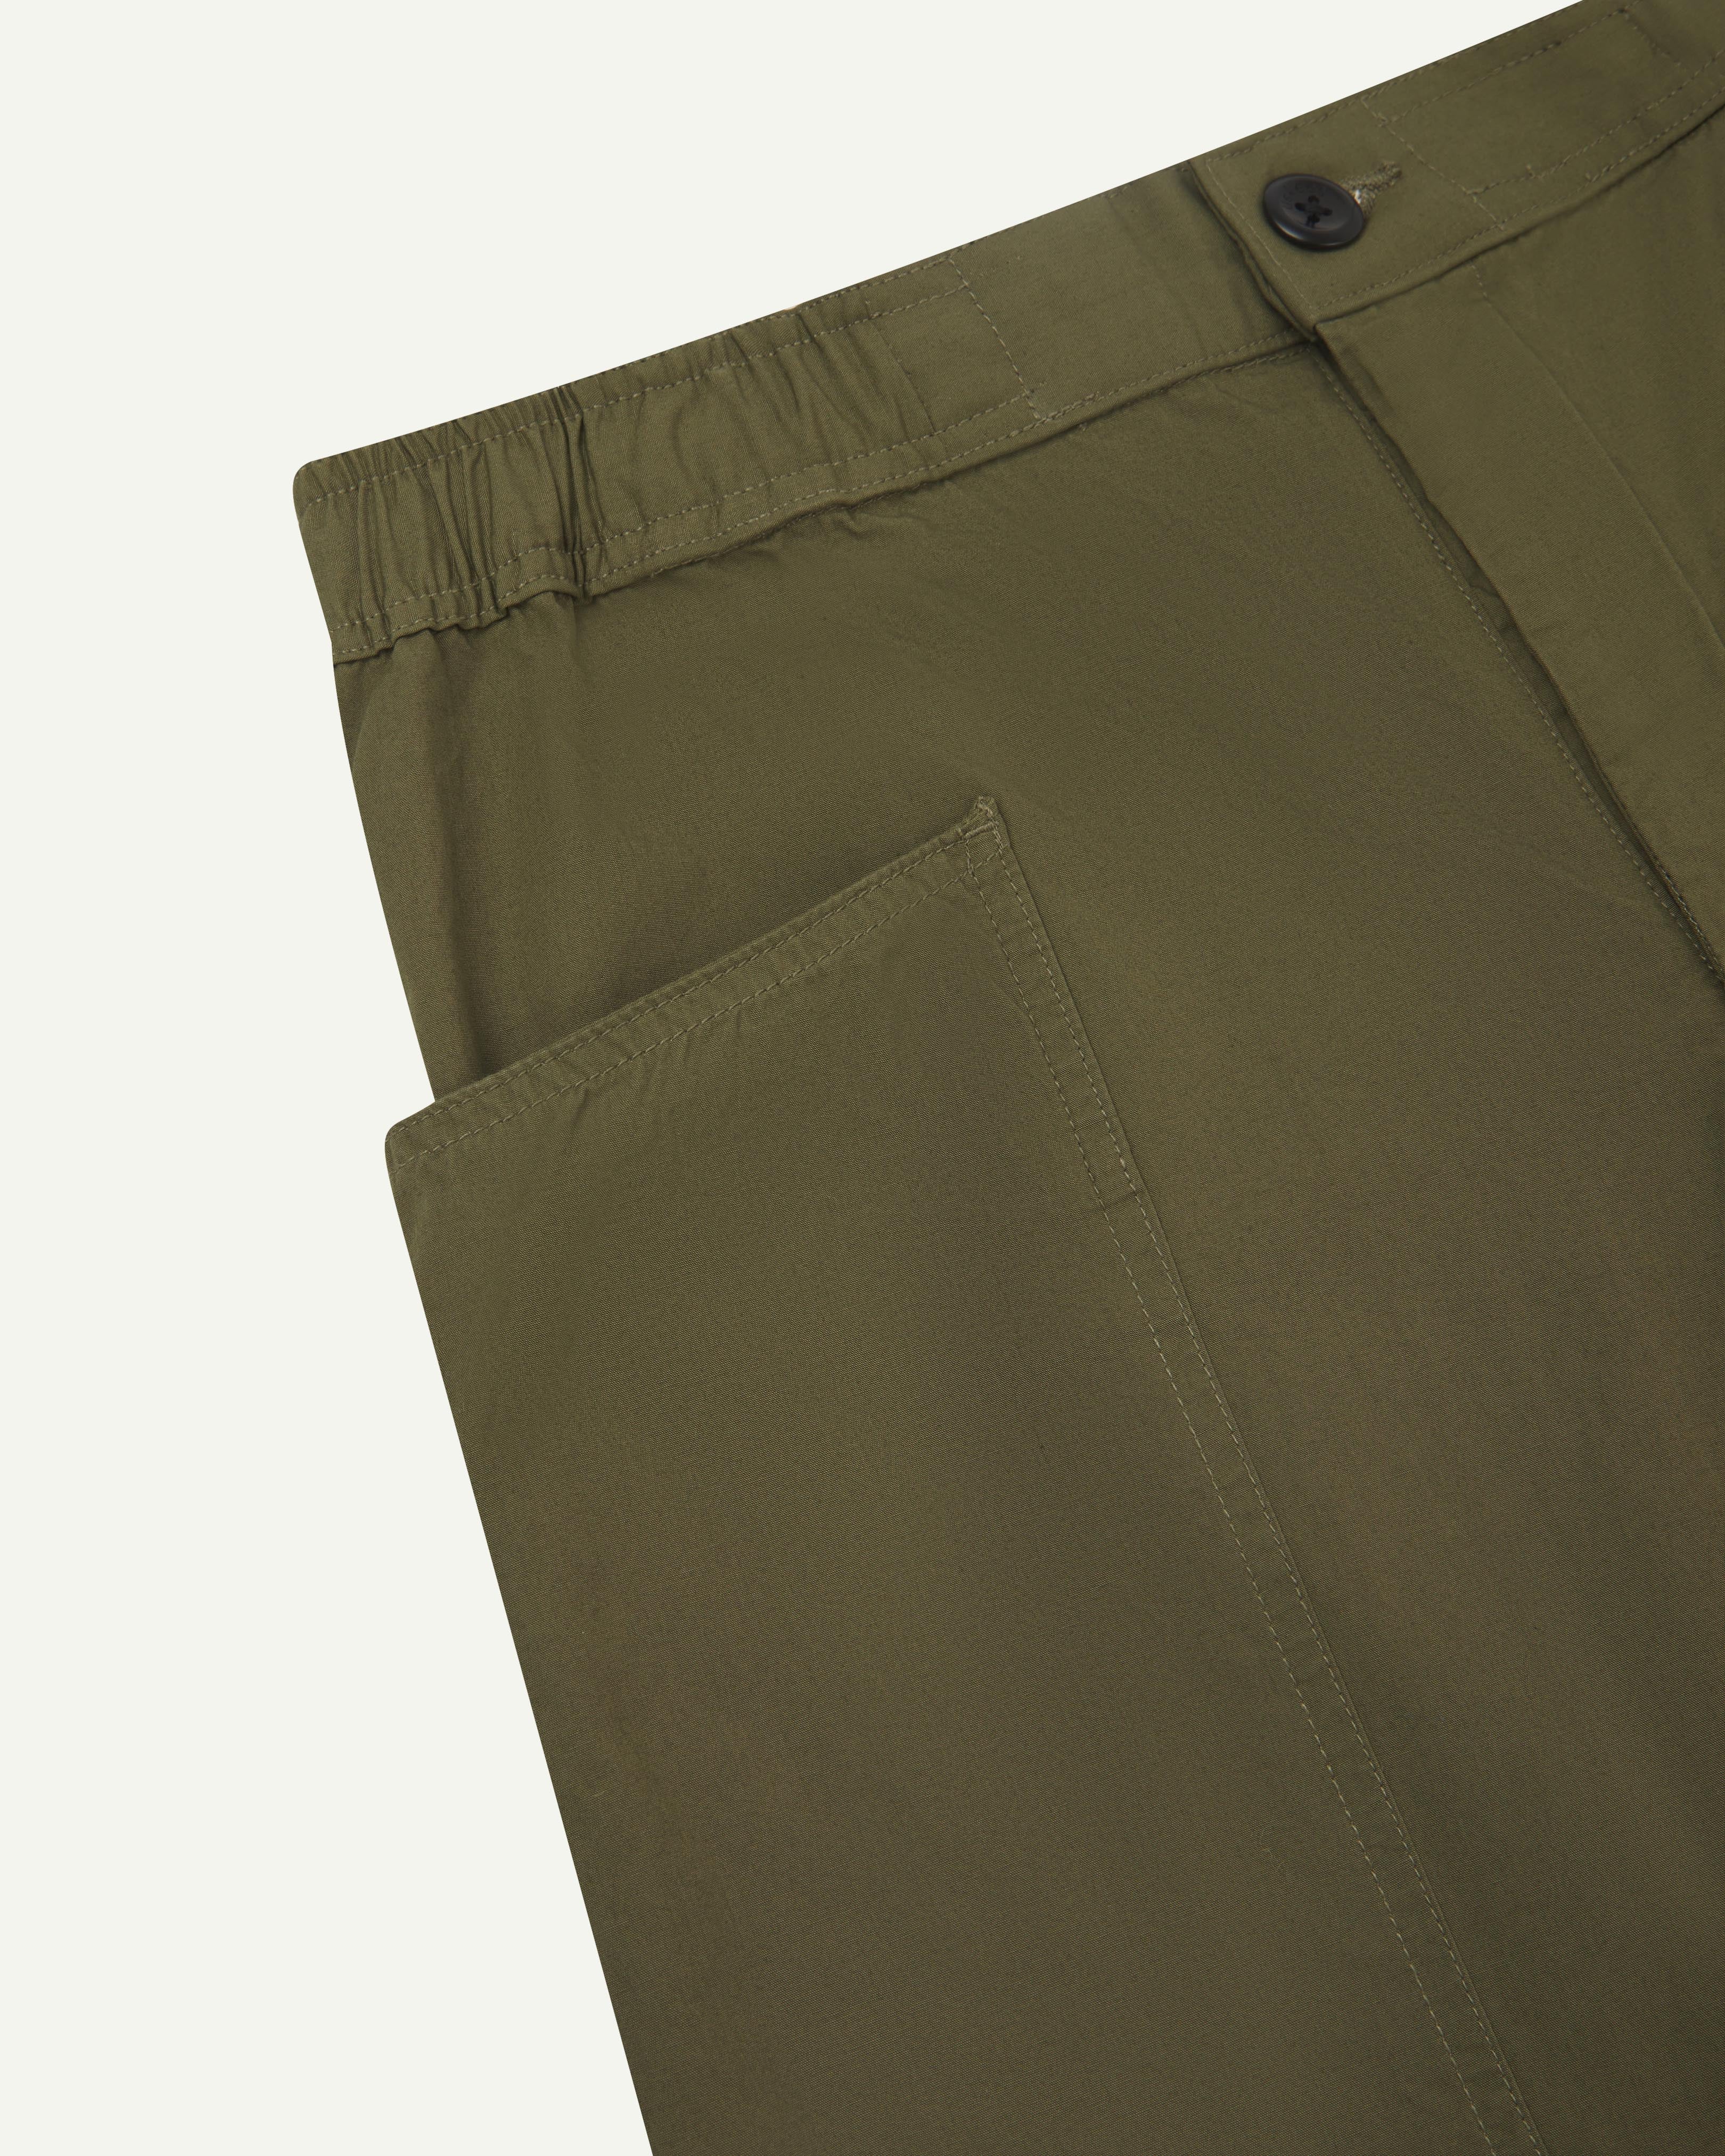 Close angled view of the elasticated waist and corozo button fastening of the olive green #5011 Uskees pants.